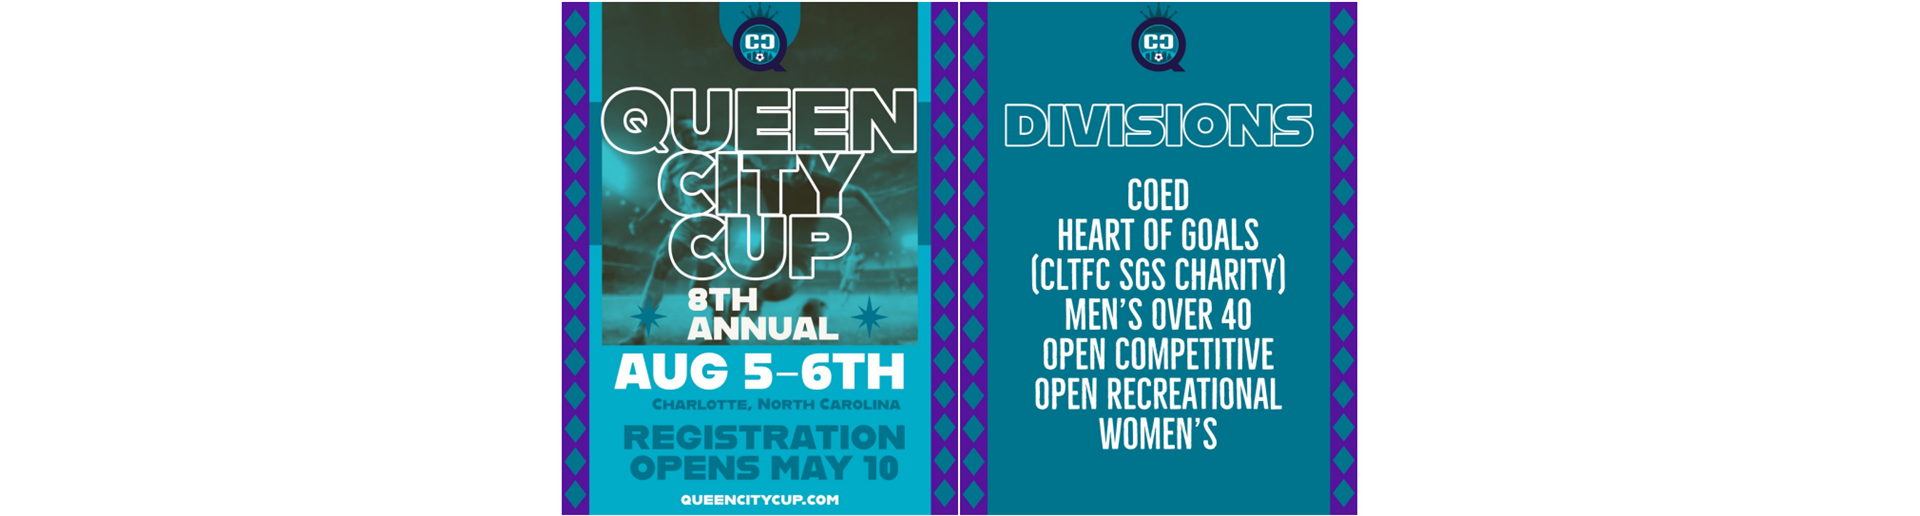 Queen City Cup Registration Opens May 10th